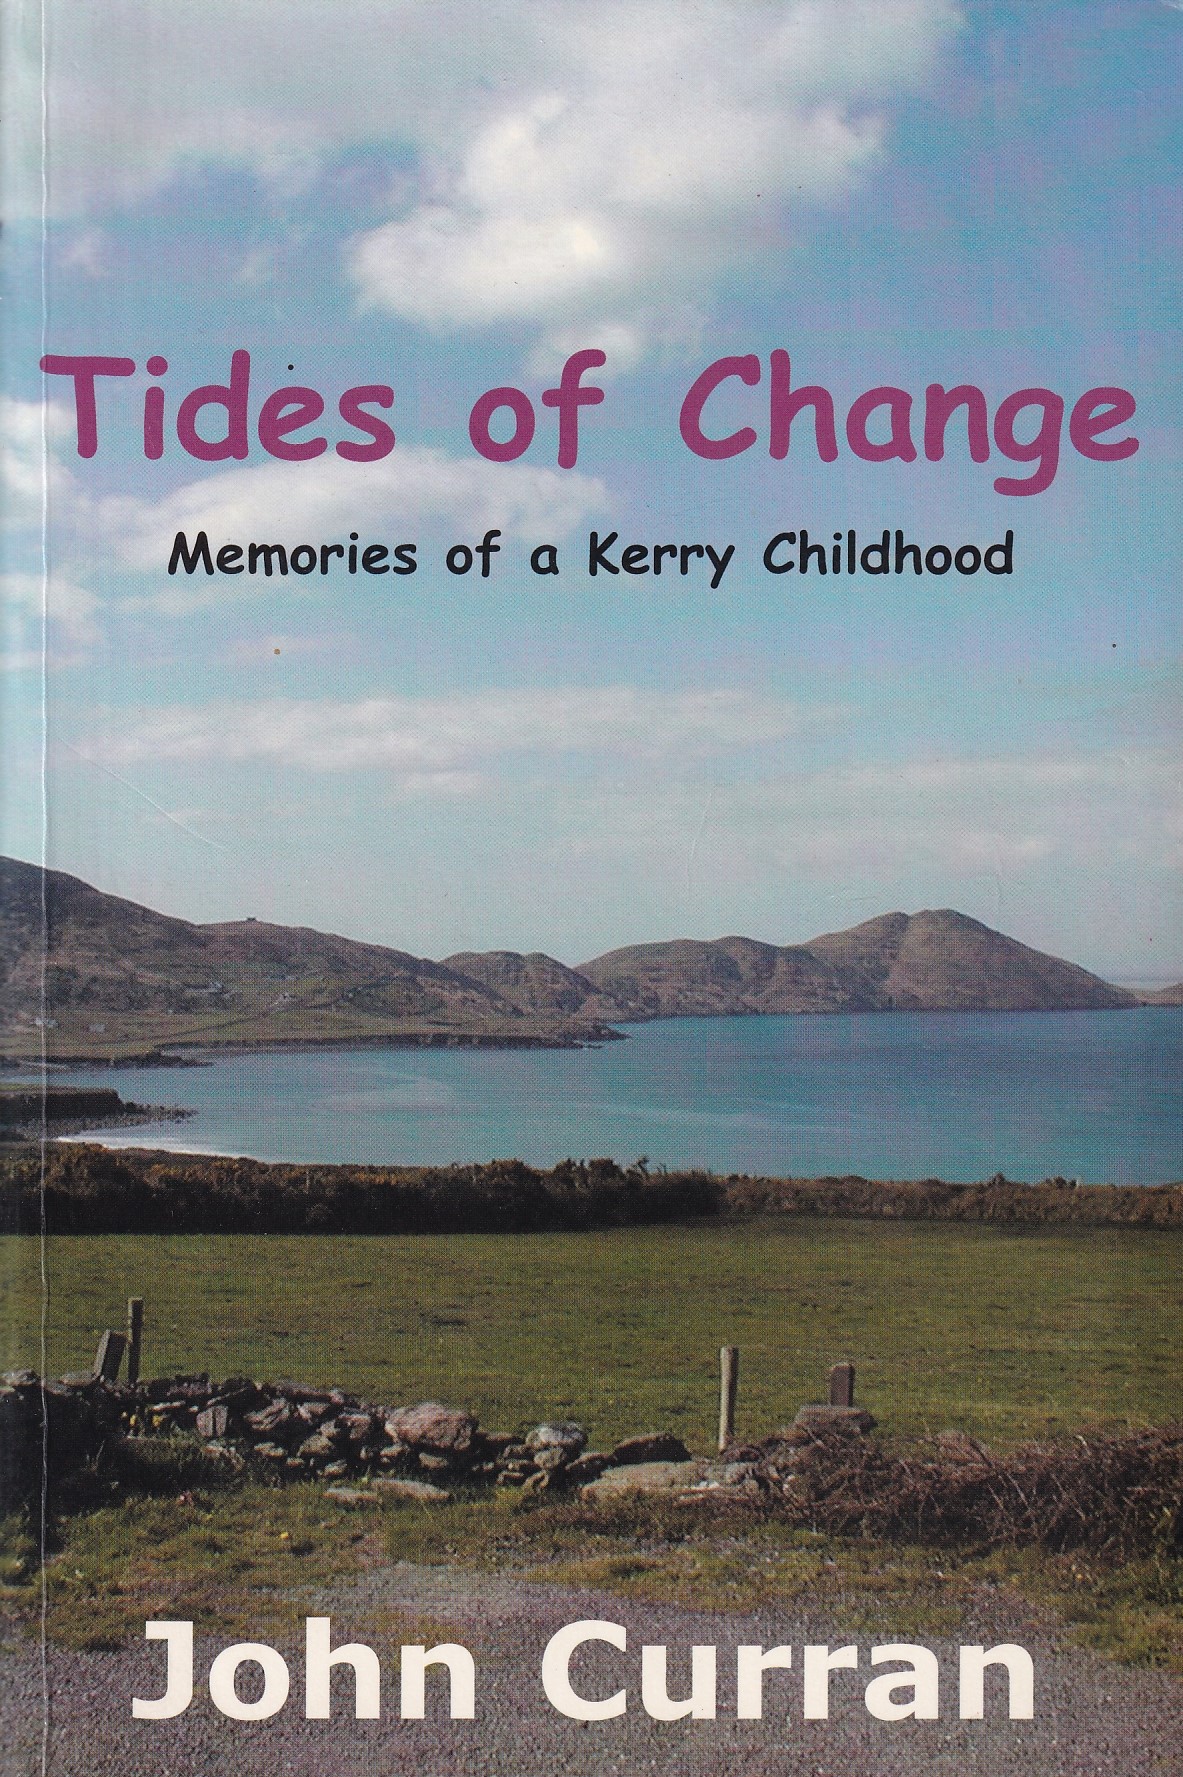 Tides of Change: Memories of a Kerry Childhood [SIGNED] by John Curran